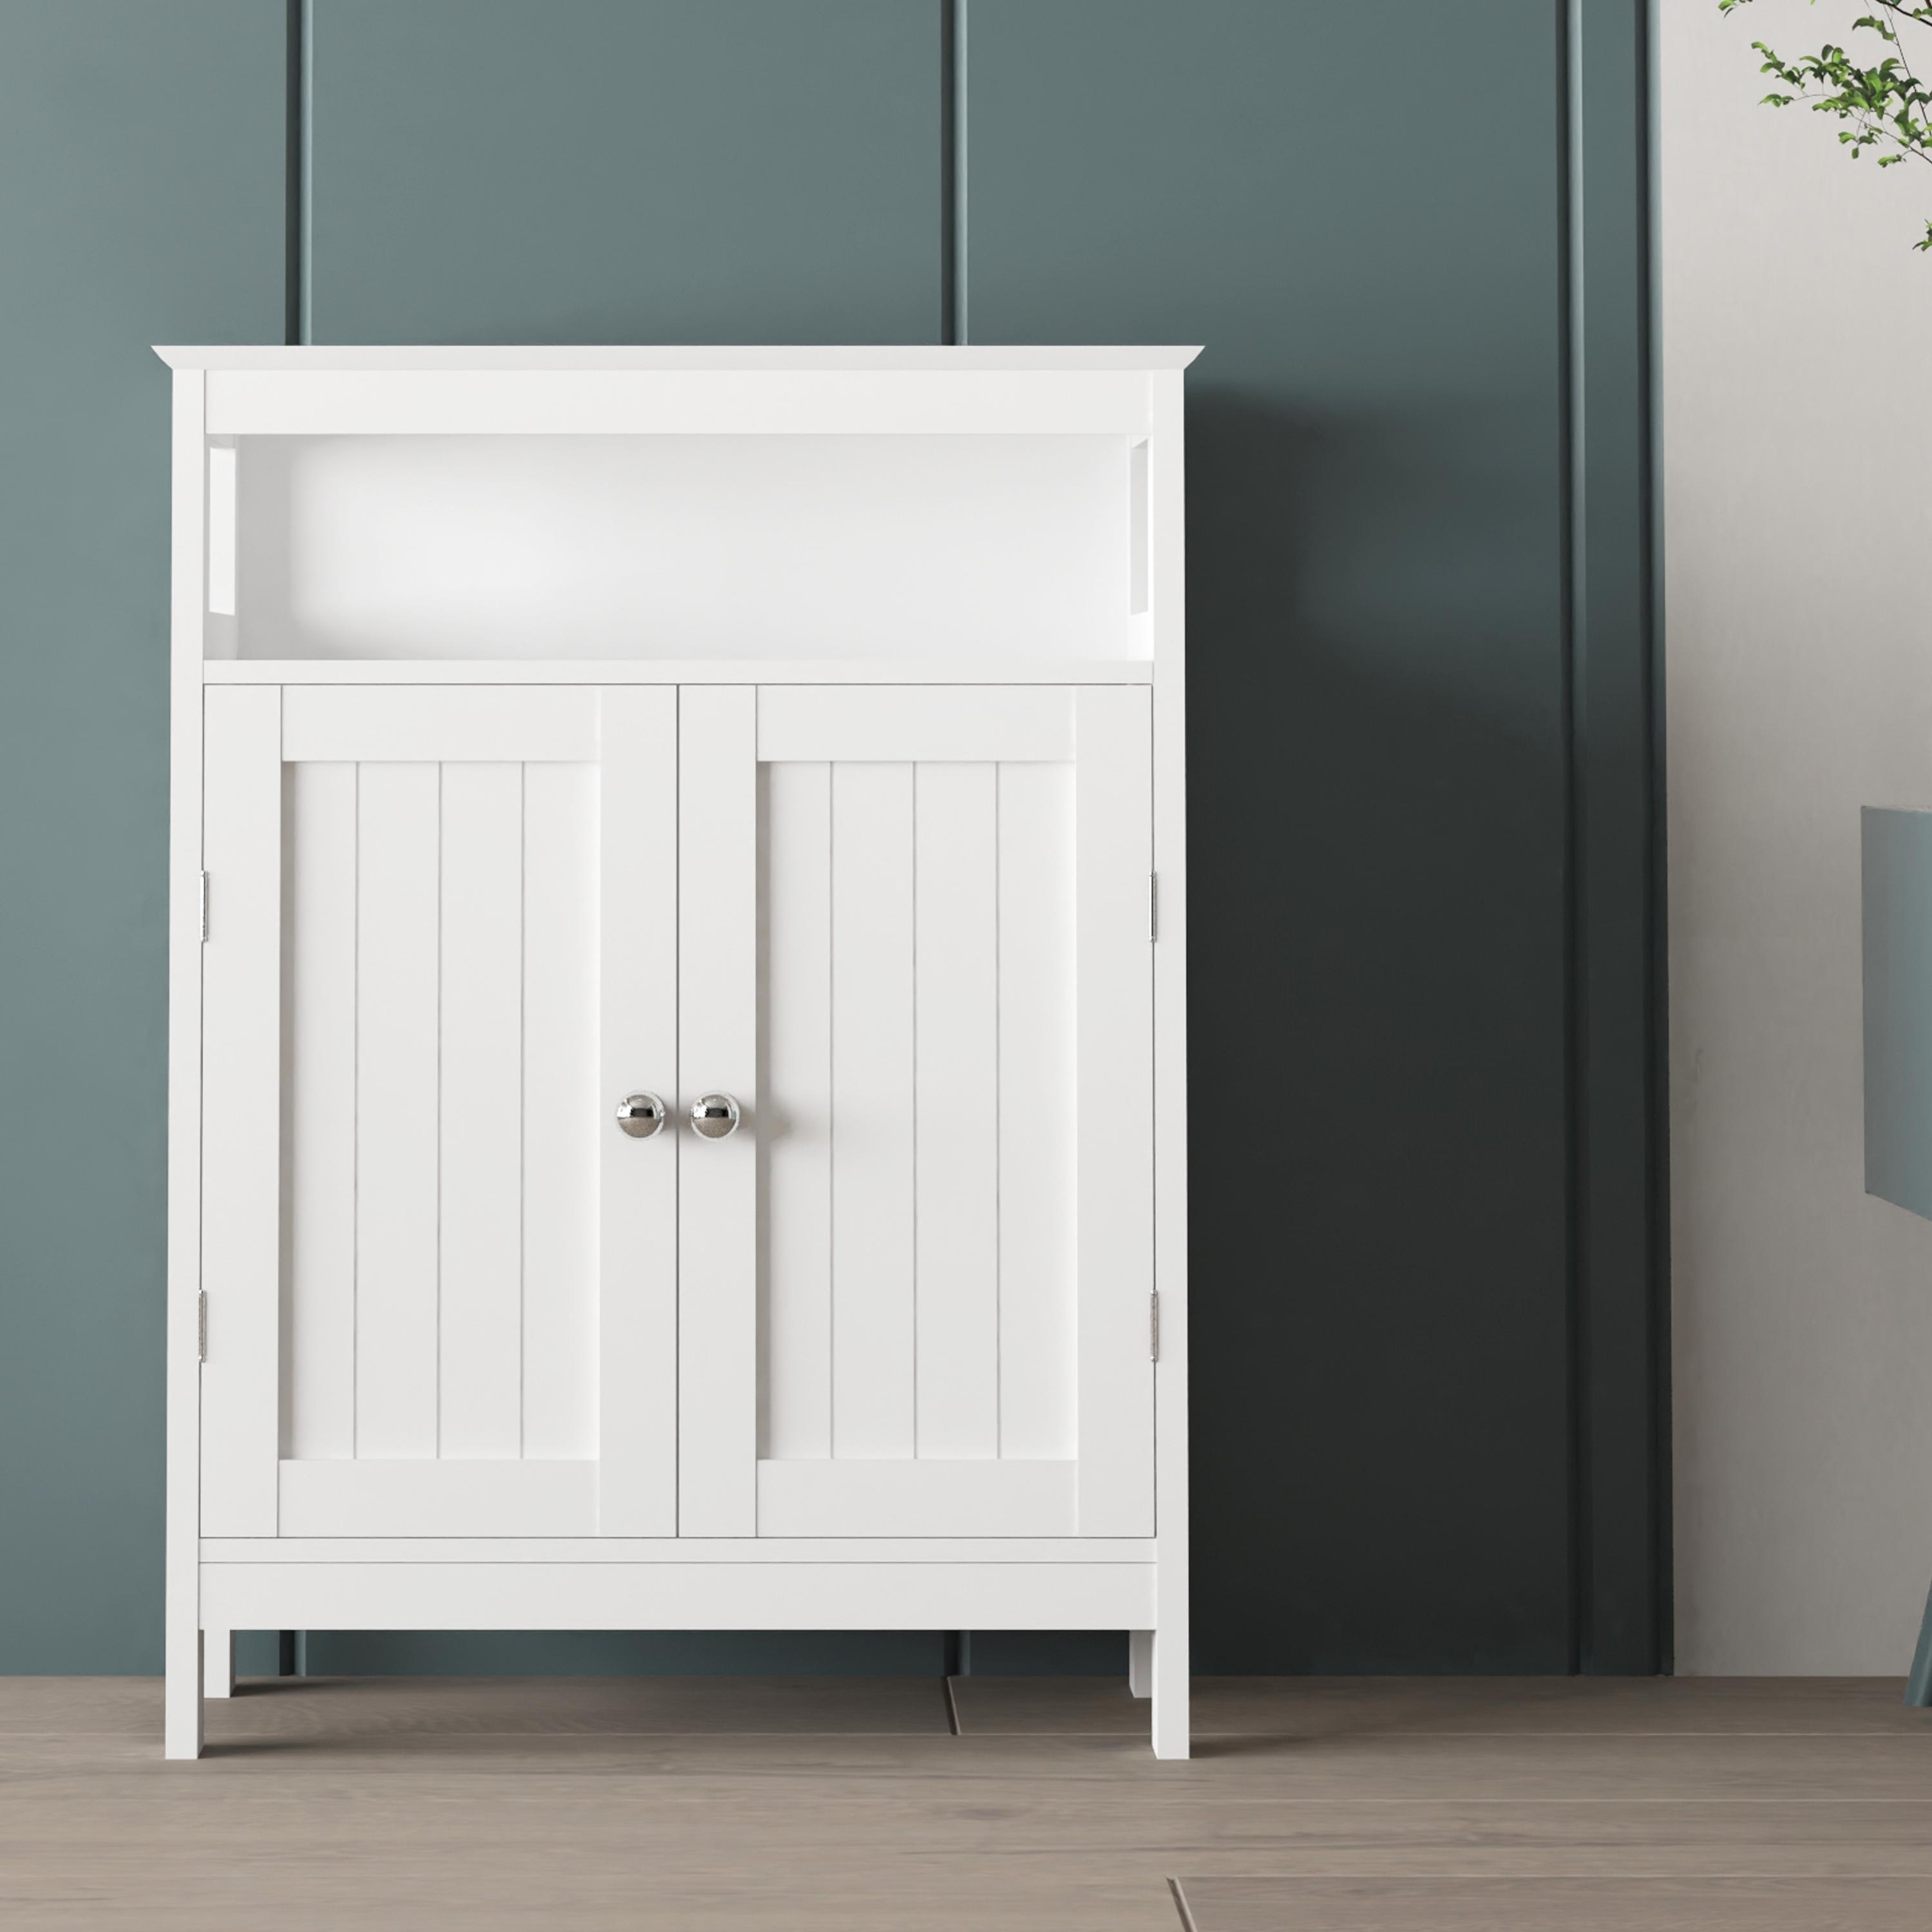 https://ak1.ostkcdn.com/images/products/is/images/direct/9bcac5945999fcb14534c72ff6476ef745428a68/Bathroom-standing-storage-cabinet.jpg